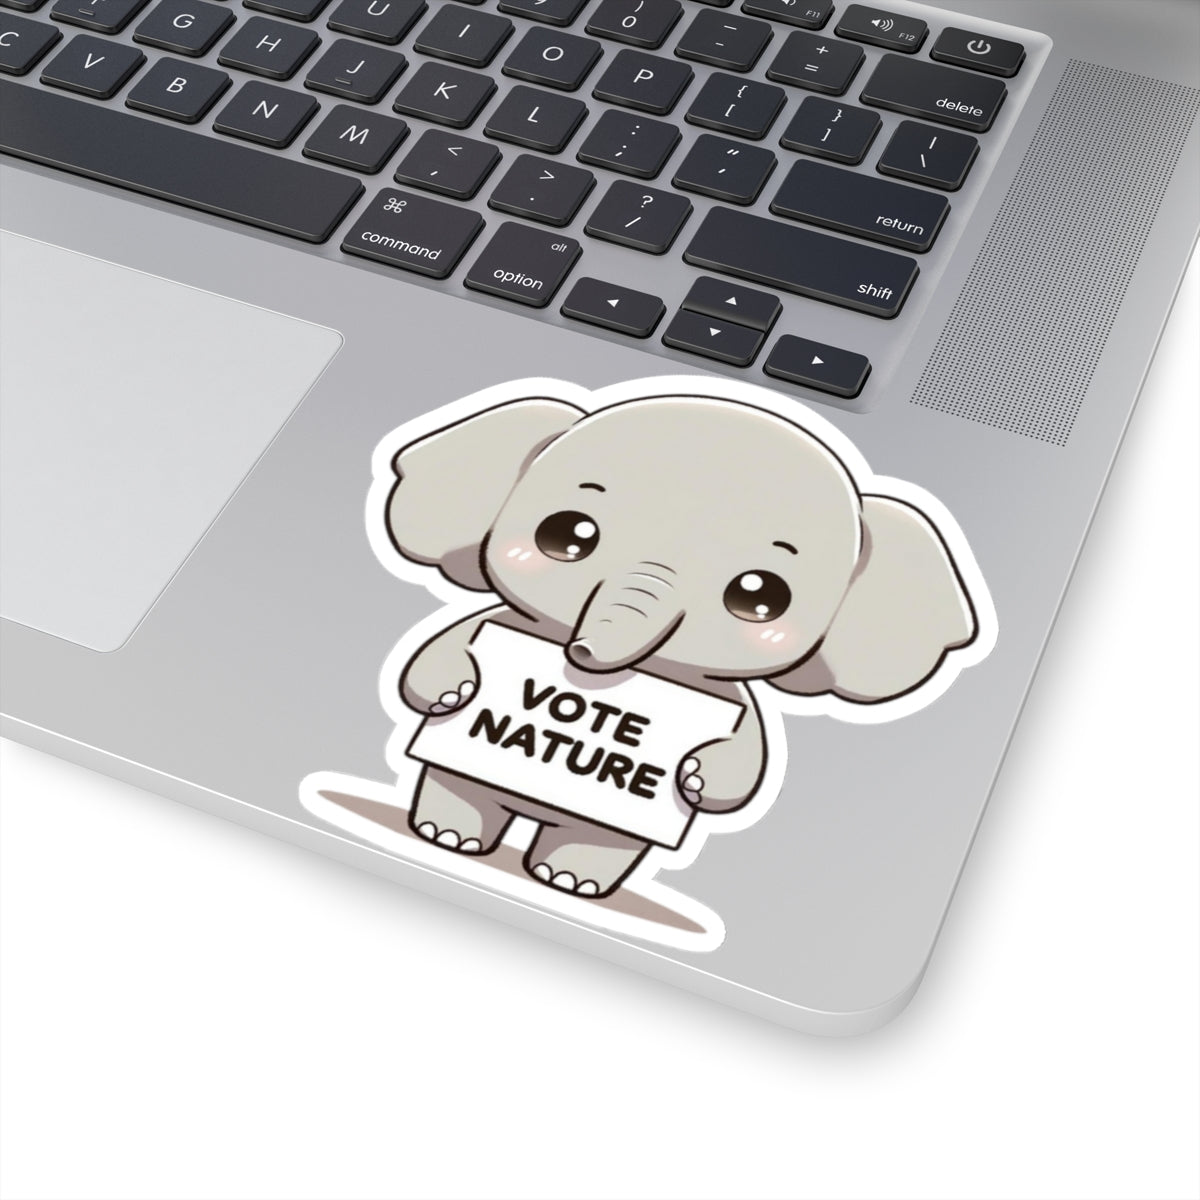 Inspirational Cute Elephant Statement vinyl Sticker: Vote Nature! for laptop, kindle, phone, ipad, instrument case, notebook, mood board